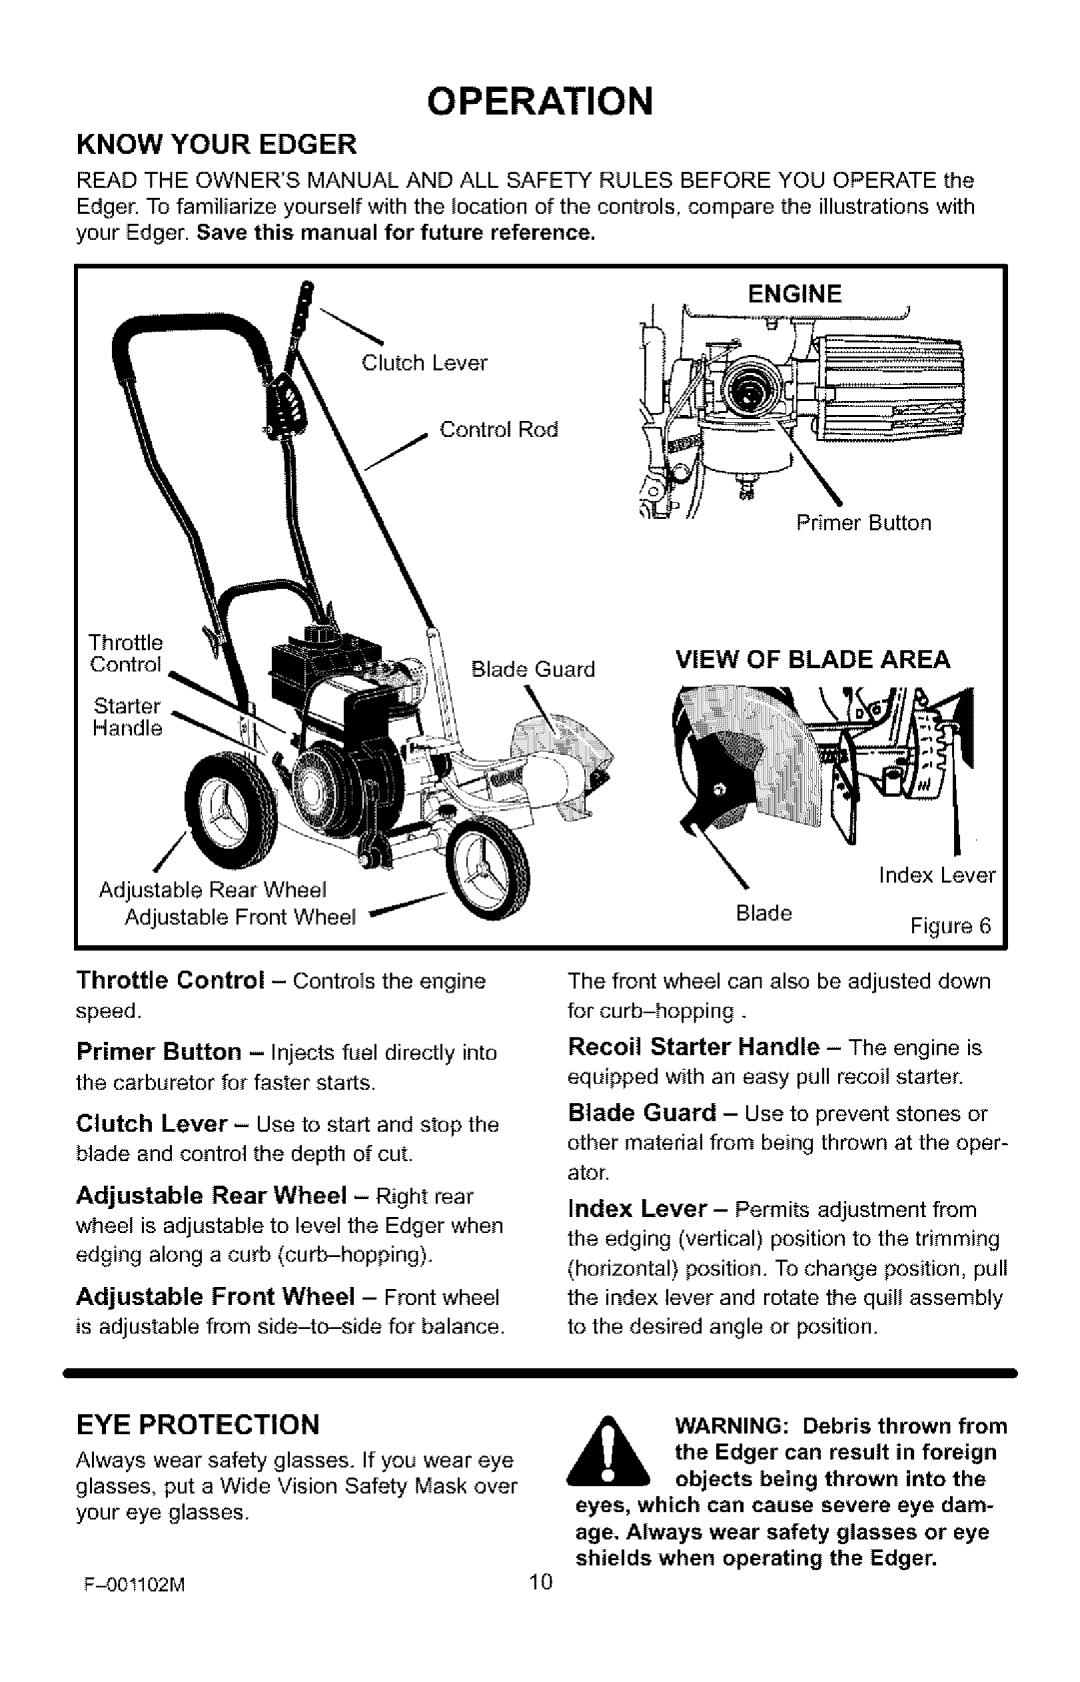 Craftsman 536.772301 manual Operation, Know Your Edger, Eye Protection 